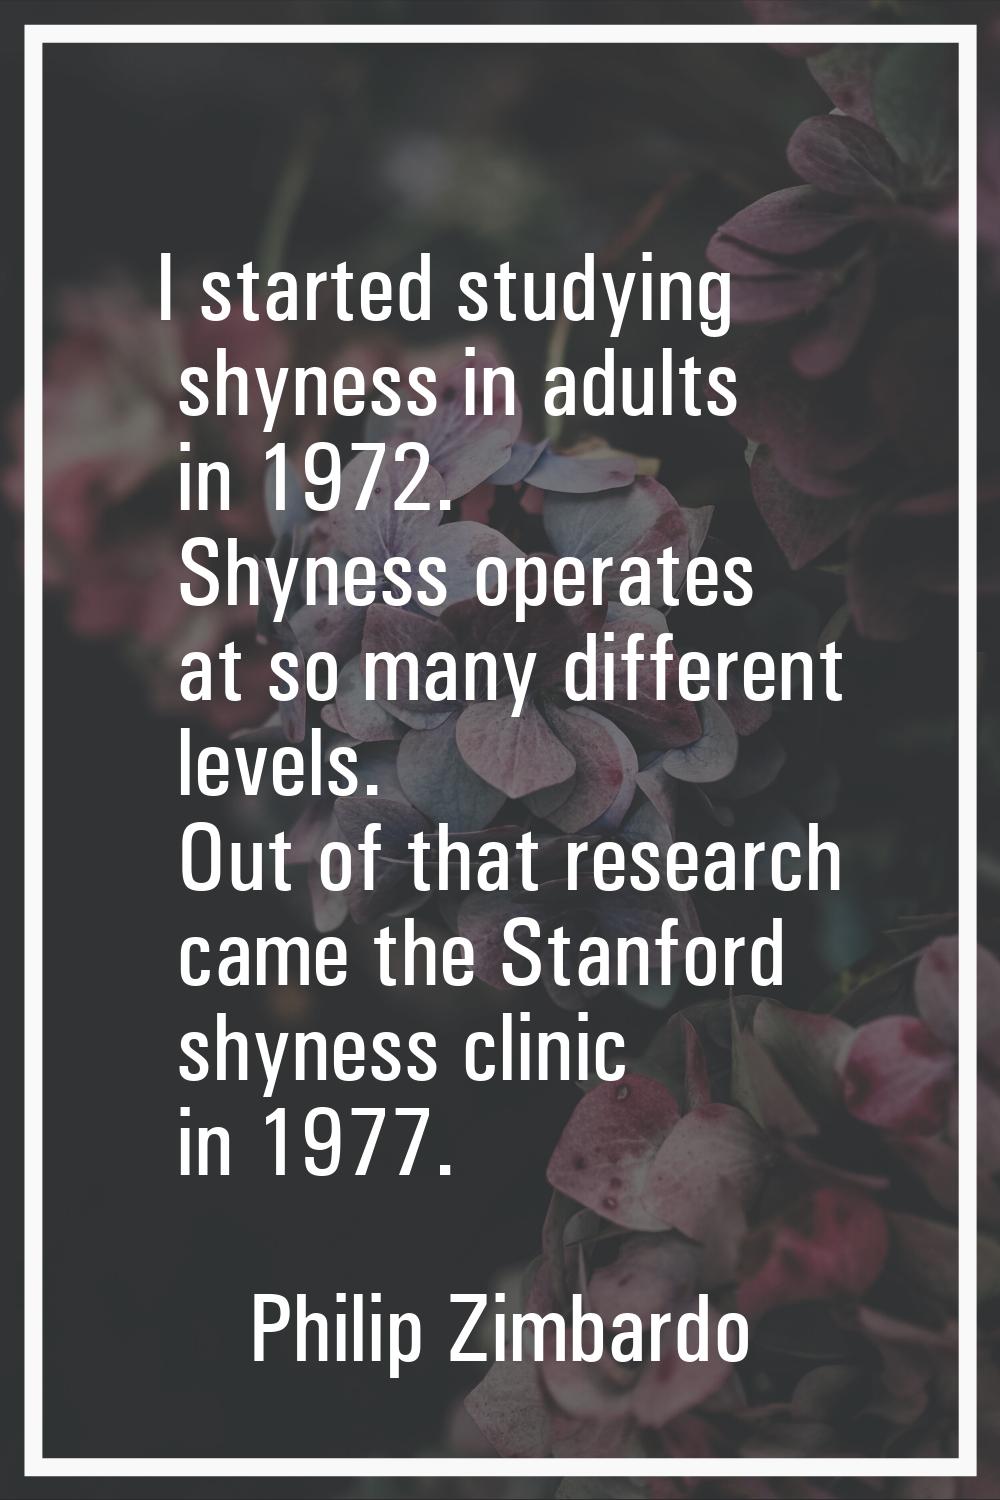 I started studying shyness in adults in 1972. Shyness operates at so many different levels. Out of 